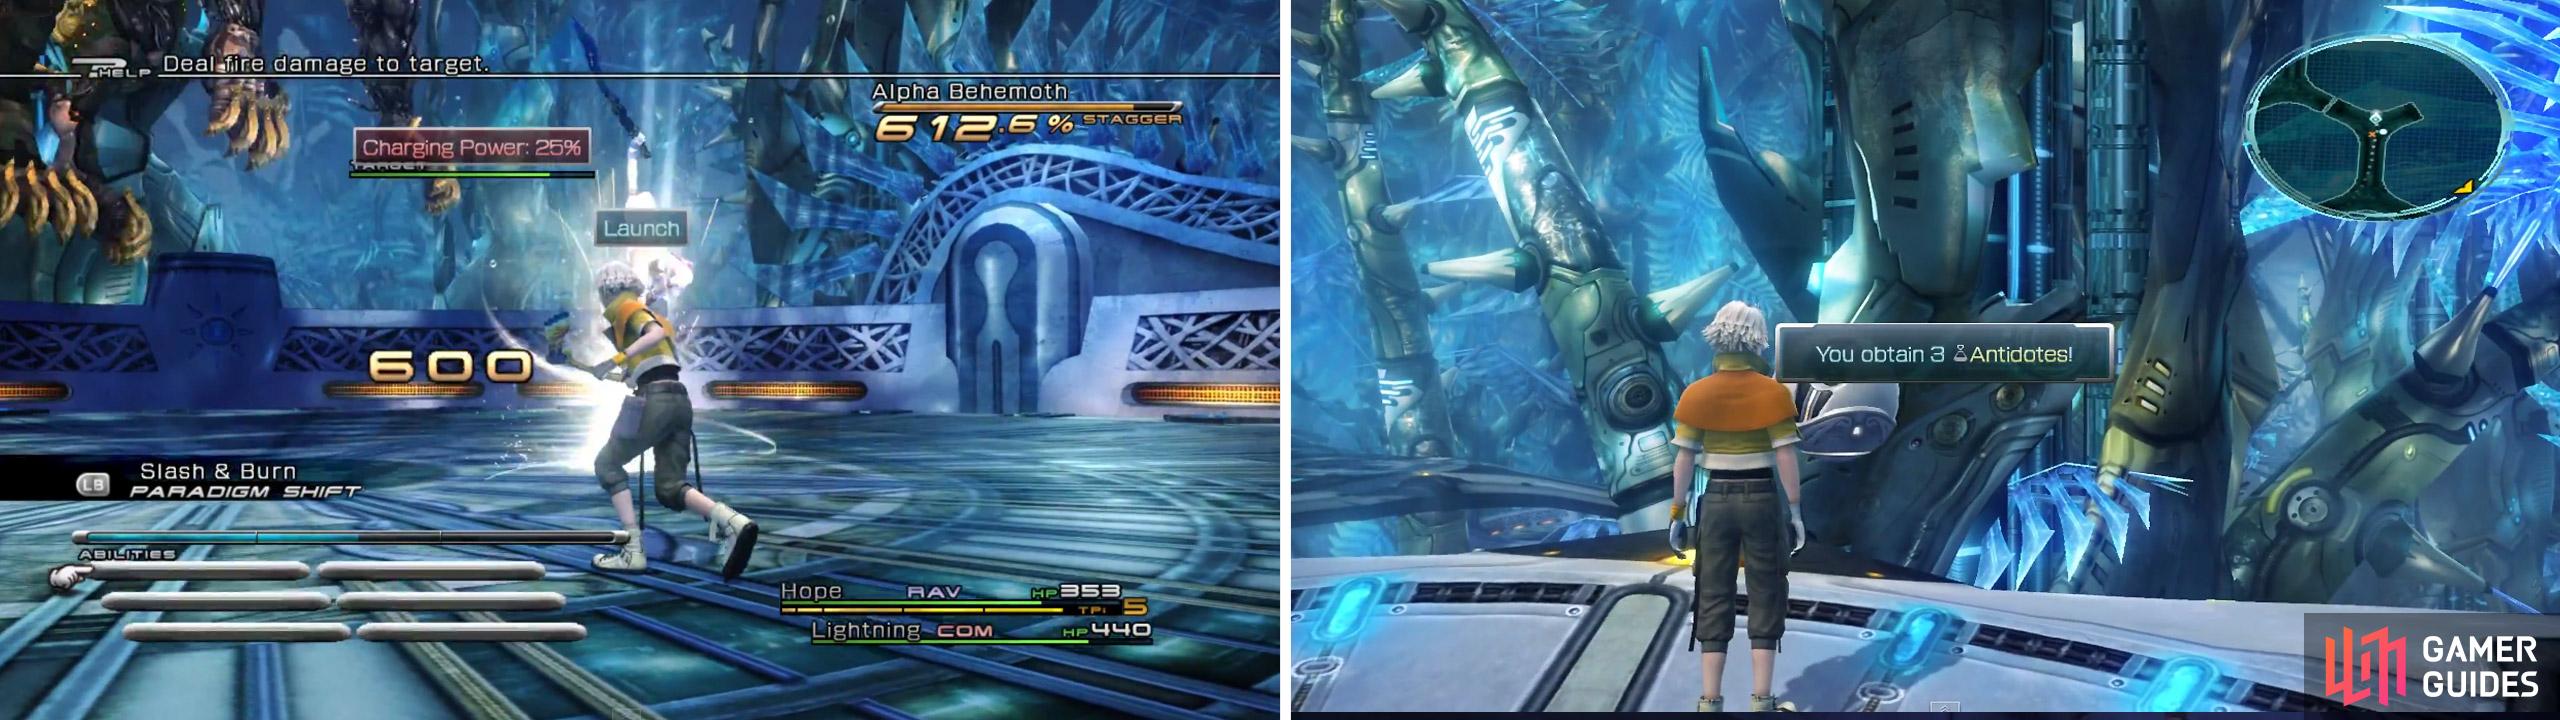 Launch the Behemoth during Stagger (left). 3x Antidotes is your reward for defeating it (right).